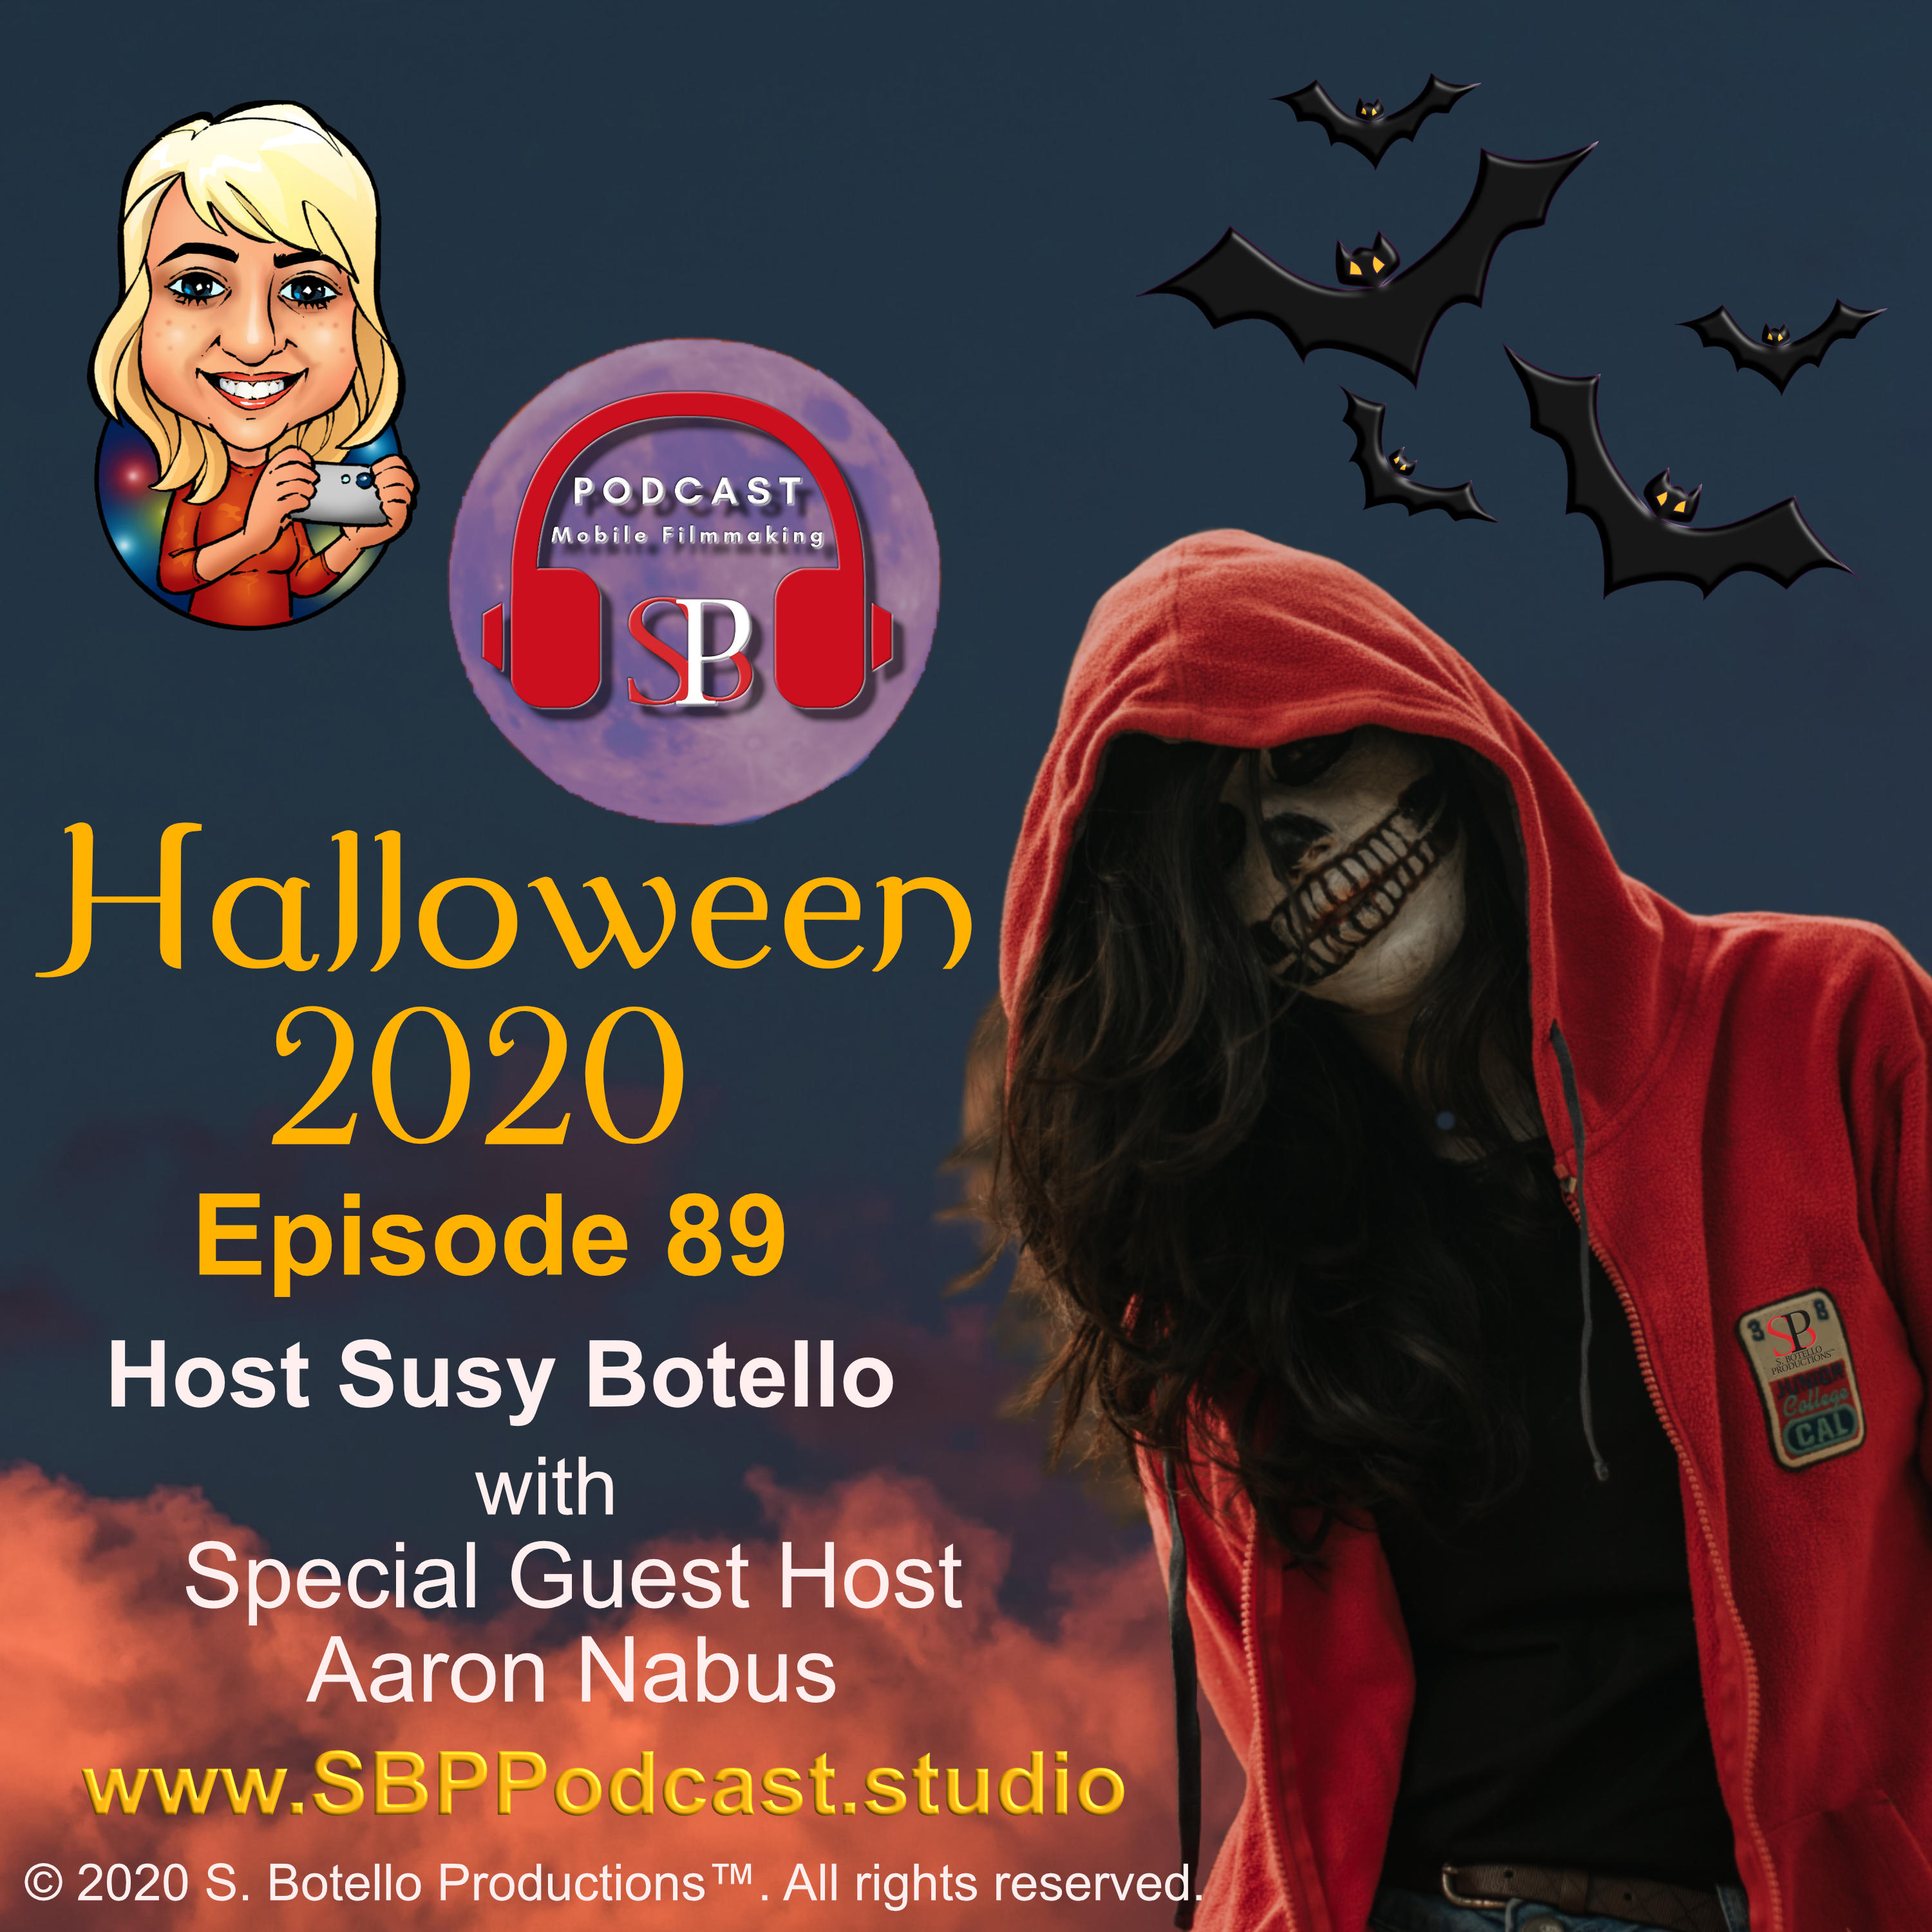 Halloween 2020 with Special Guest Host Aaron Nabus Image